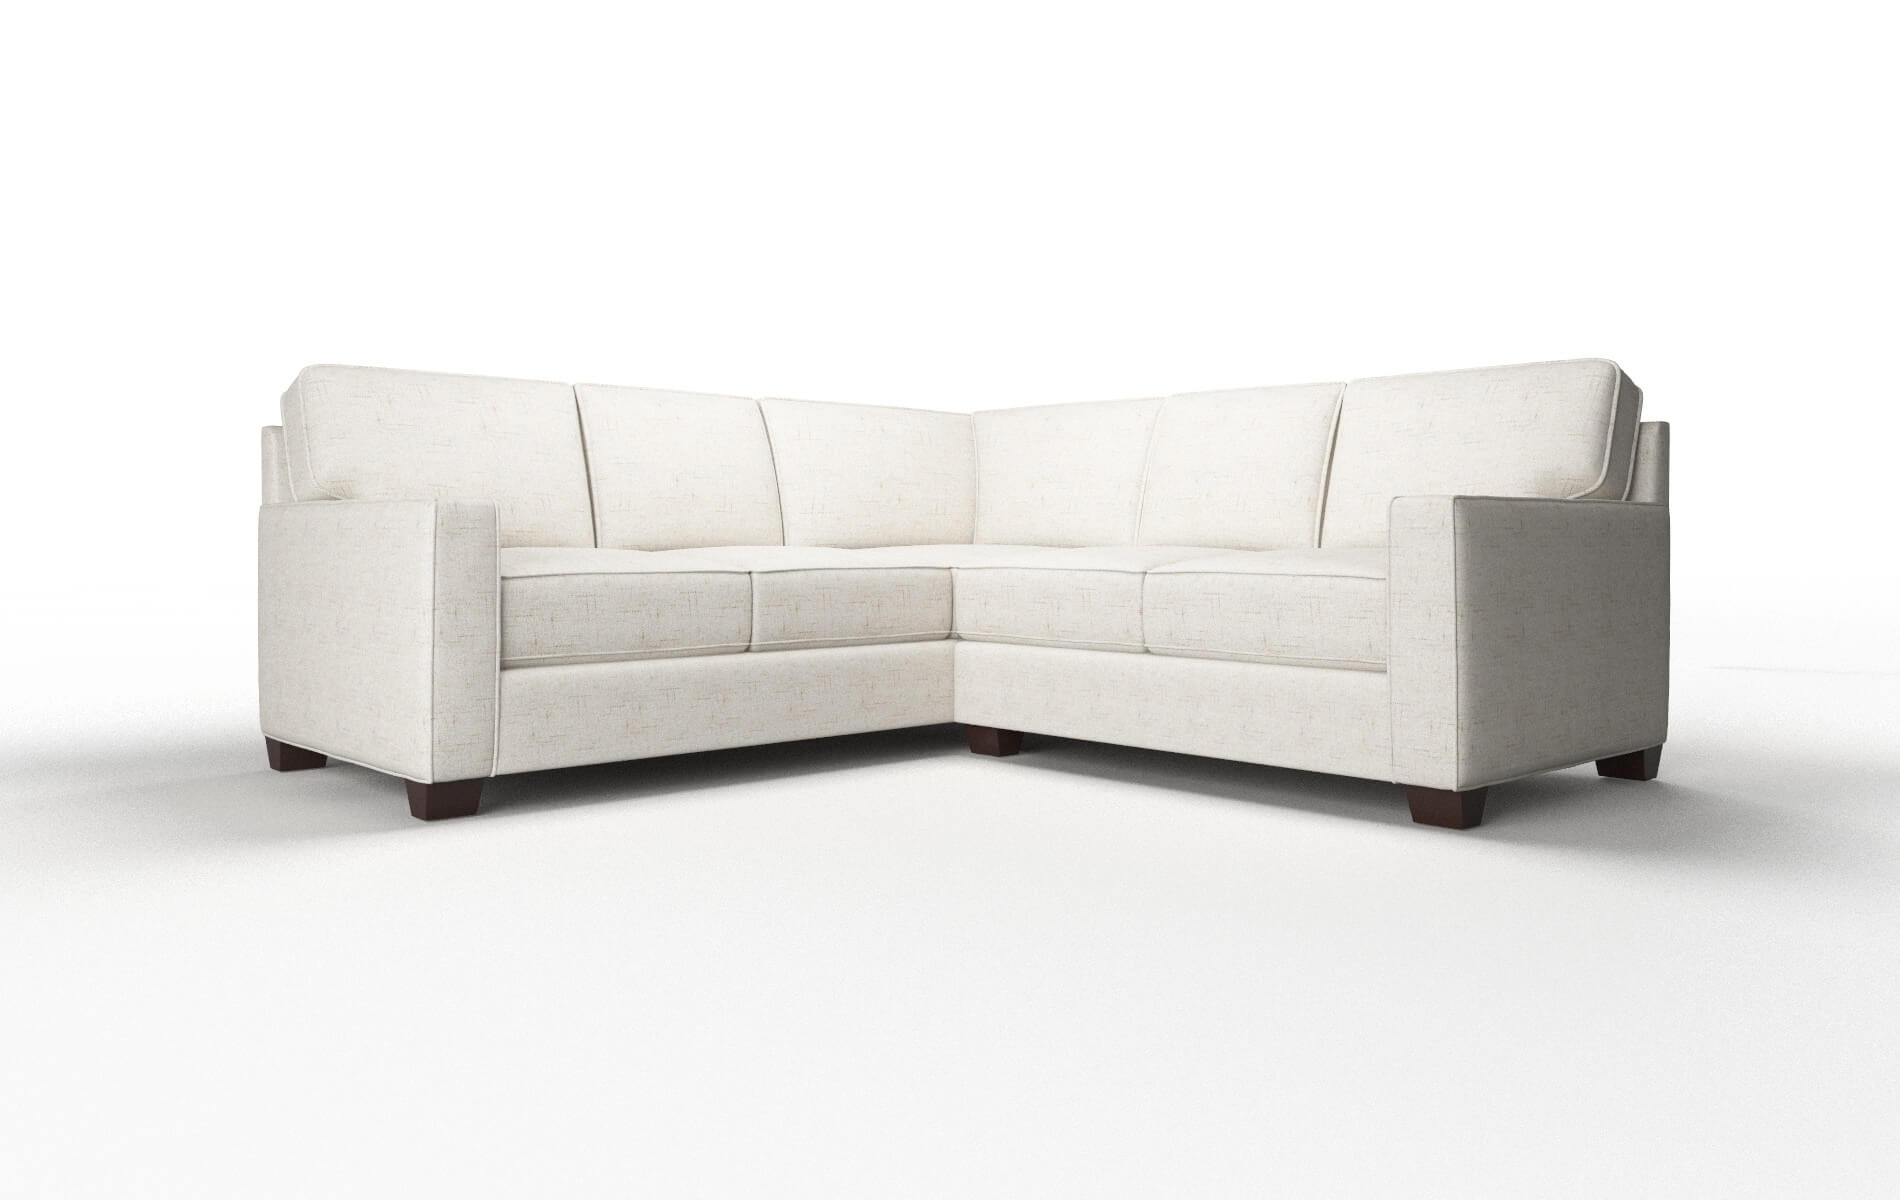 Chicago Oceanside Natural Sectional espresso legs